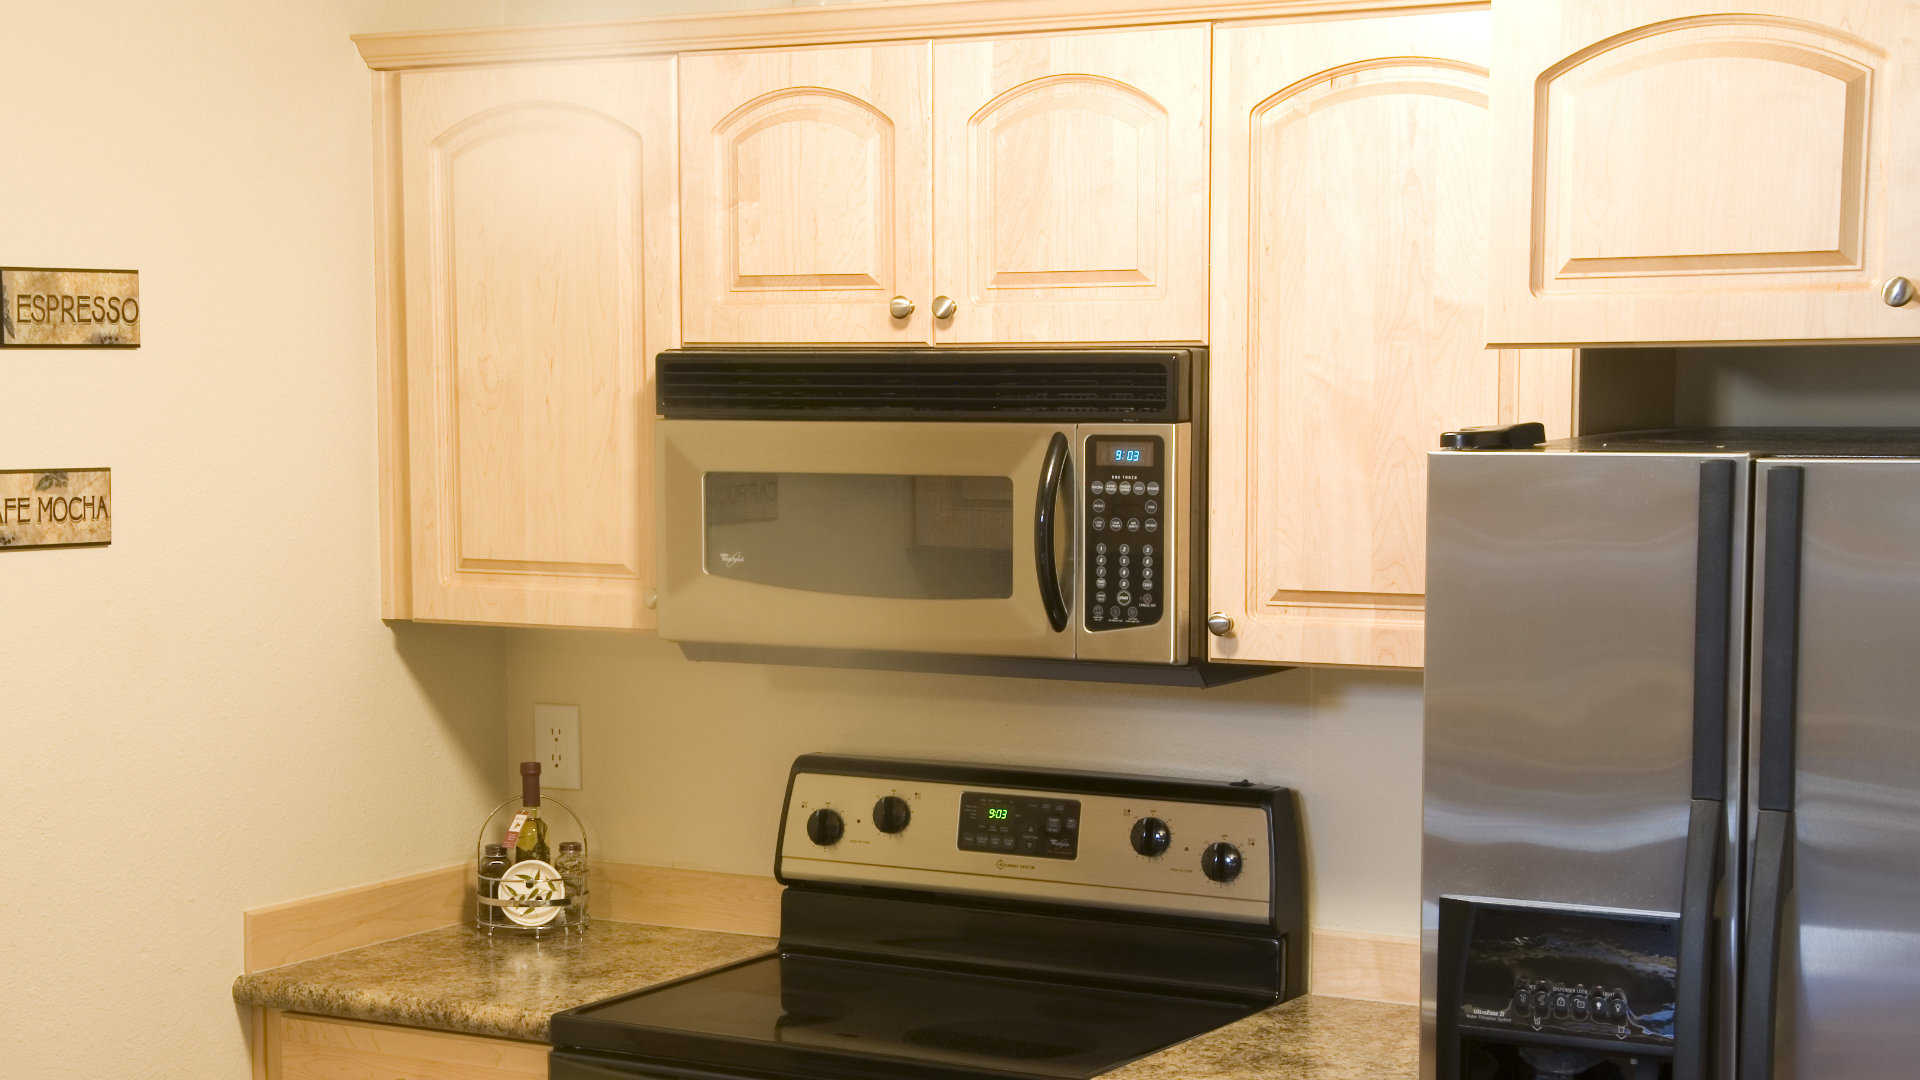 Remove An Over The Range Microwave, Over The Range Microwave Mounted In Cabinet